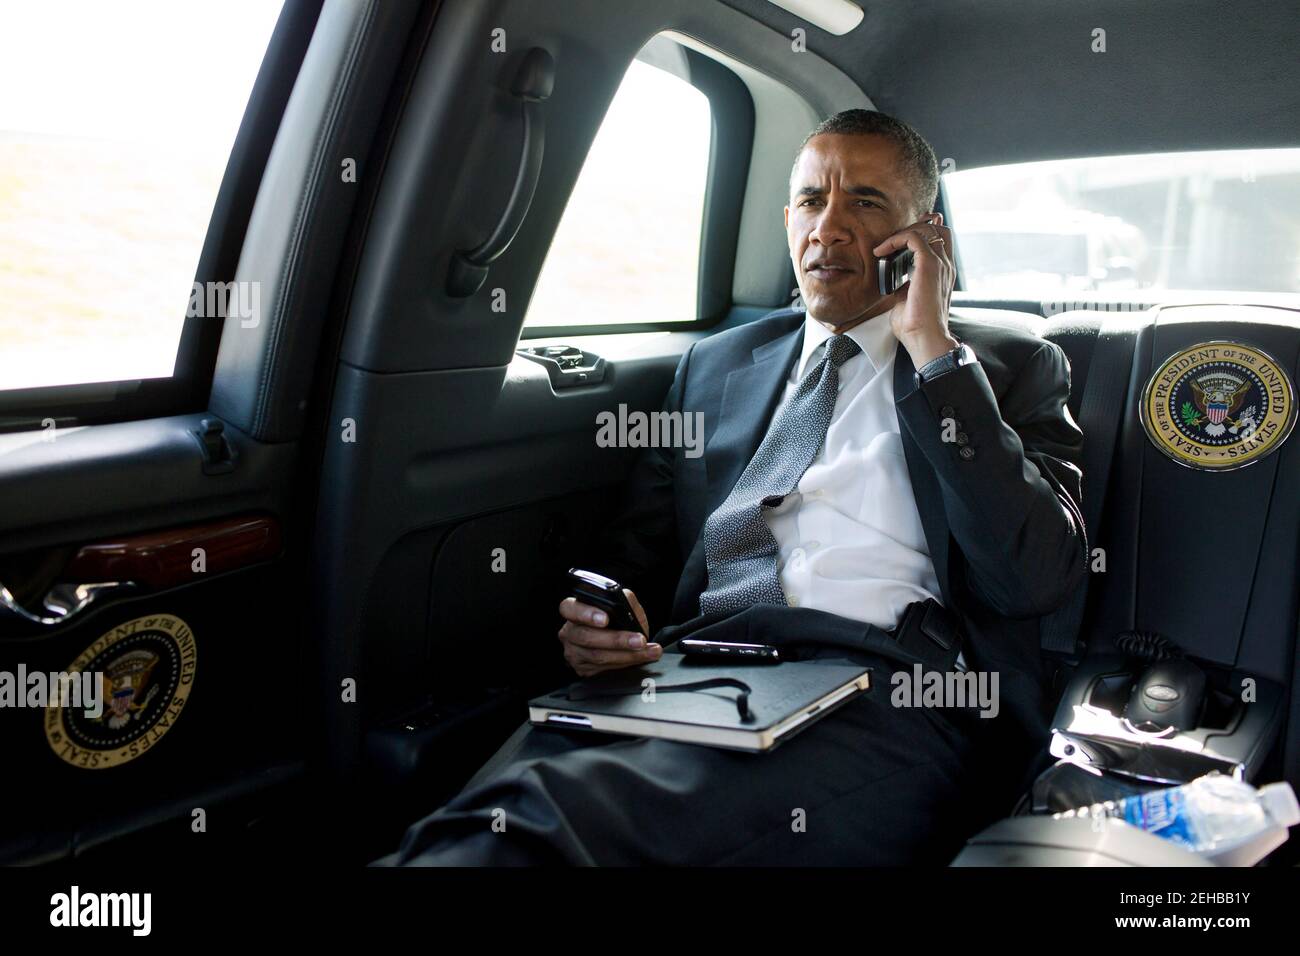 President Barack Obama talks on the phone with Aurora Mayor Steve Hogan during the motorcade ride to Palm Beach International Airport in Palm Beach, Fla., July 20, 2012. The President called Mayor Hogan to offer his condolences and support to the Aurora community. Stock Photo